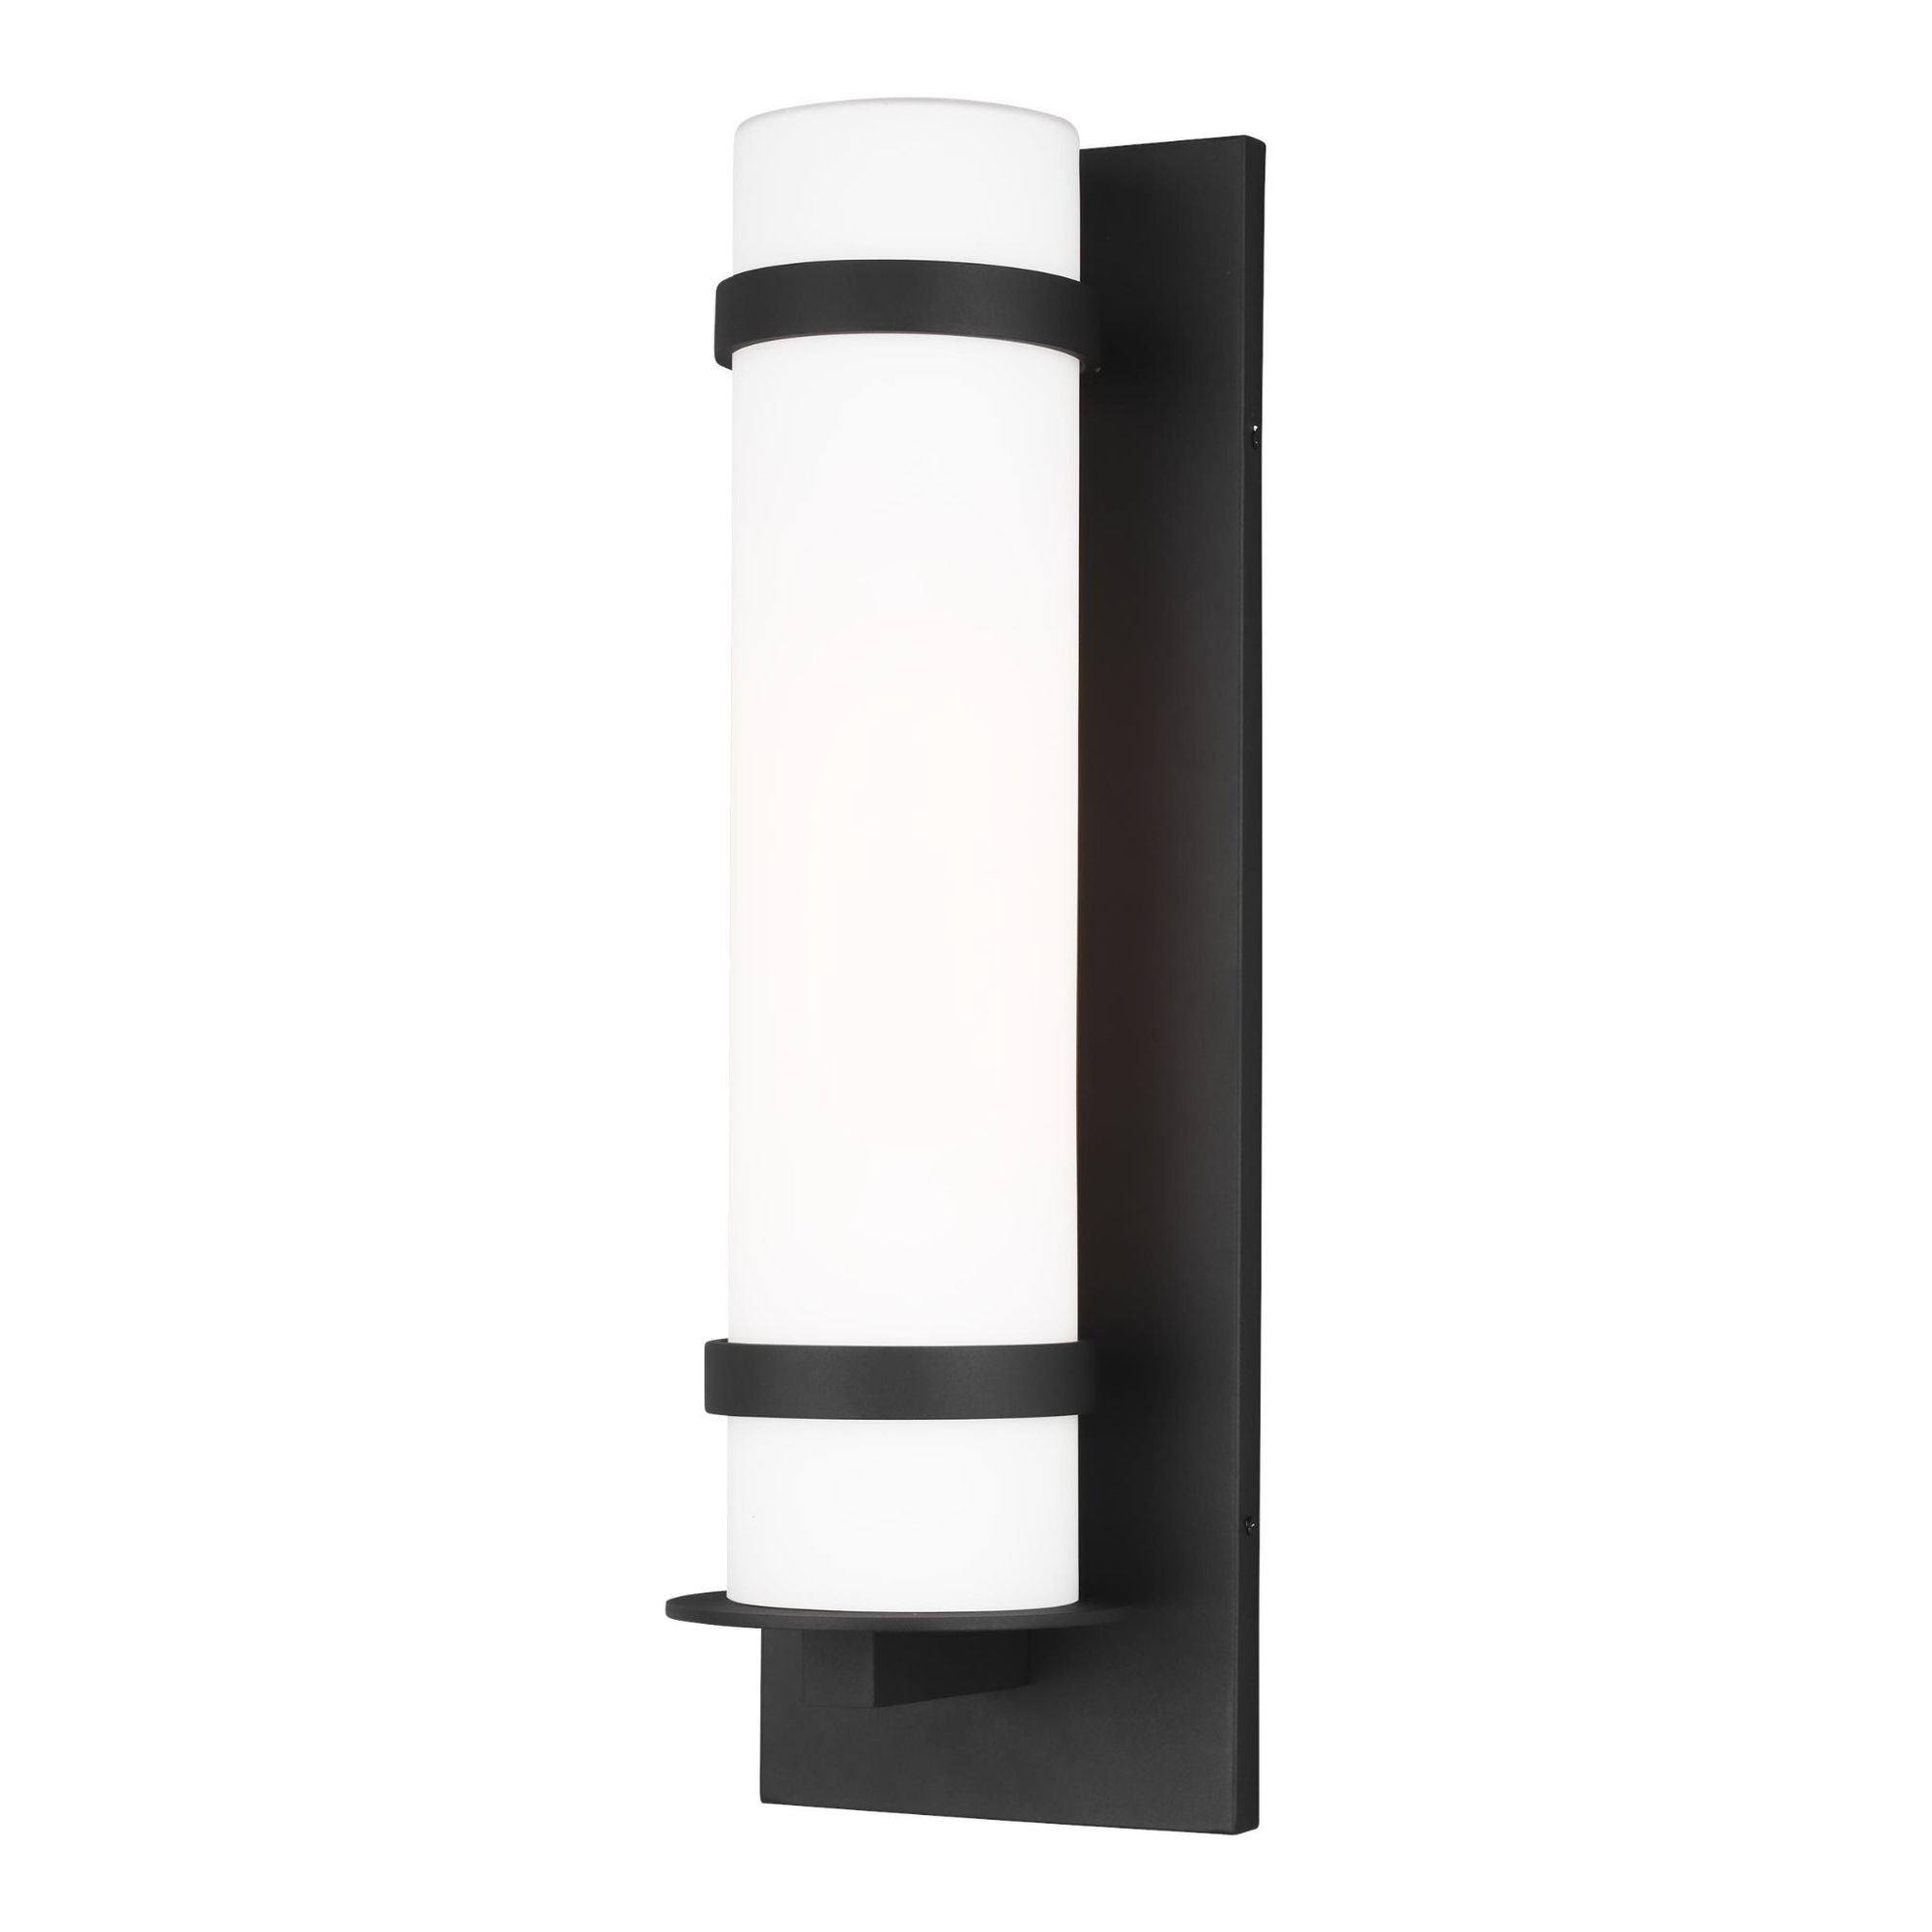 Alban Large One Light Outdoor Wall Lantern Modern Fixture 8" Width 24.625" Height Aluminum Round Etched Opal Shade in Black